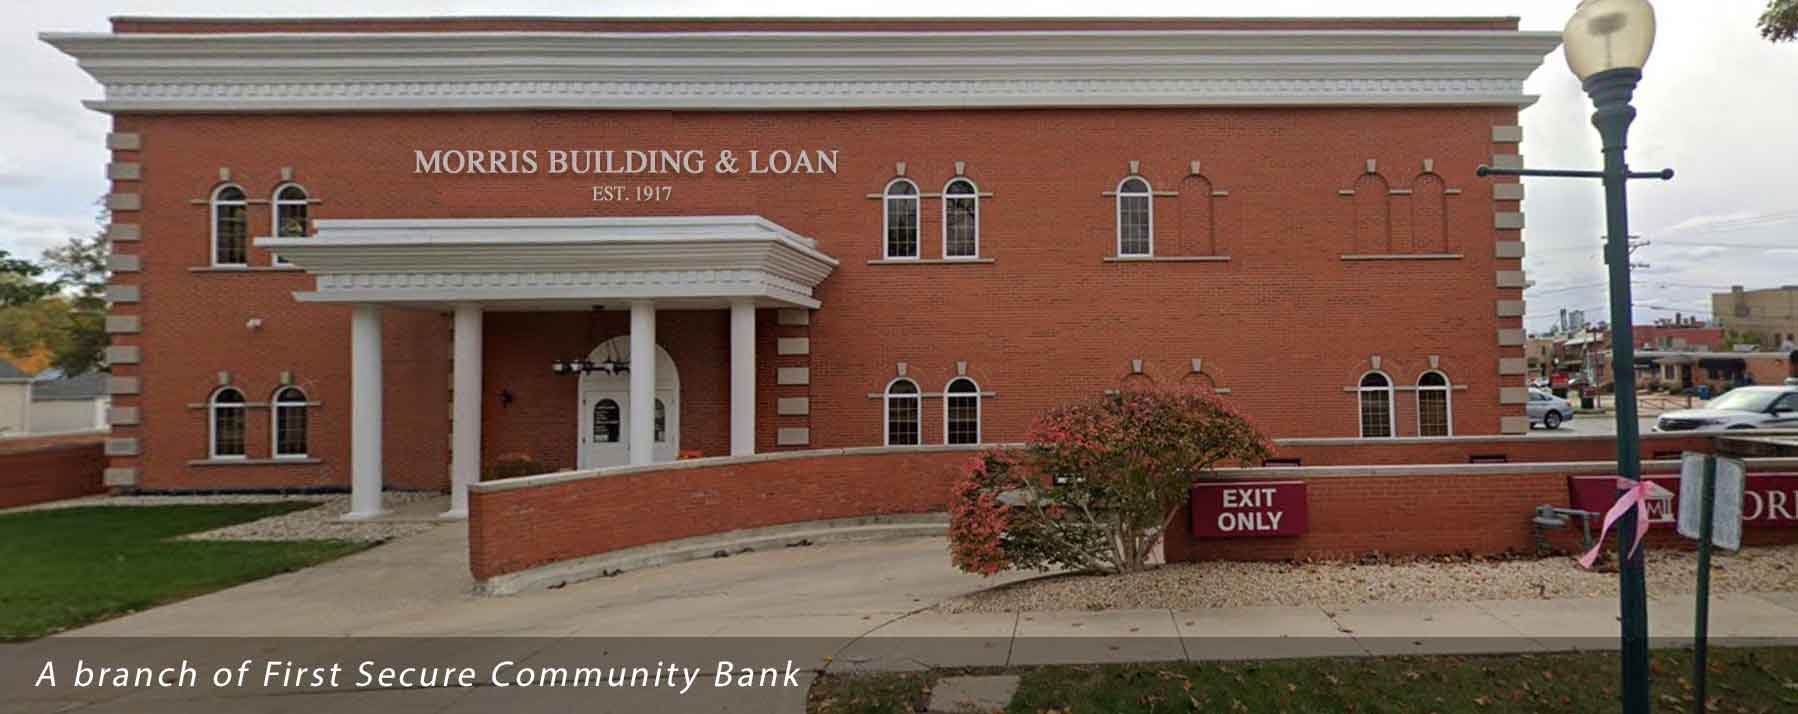 First Secure Community bank branch, Morris building and loan